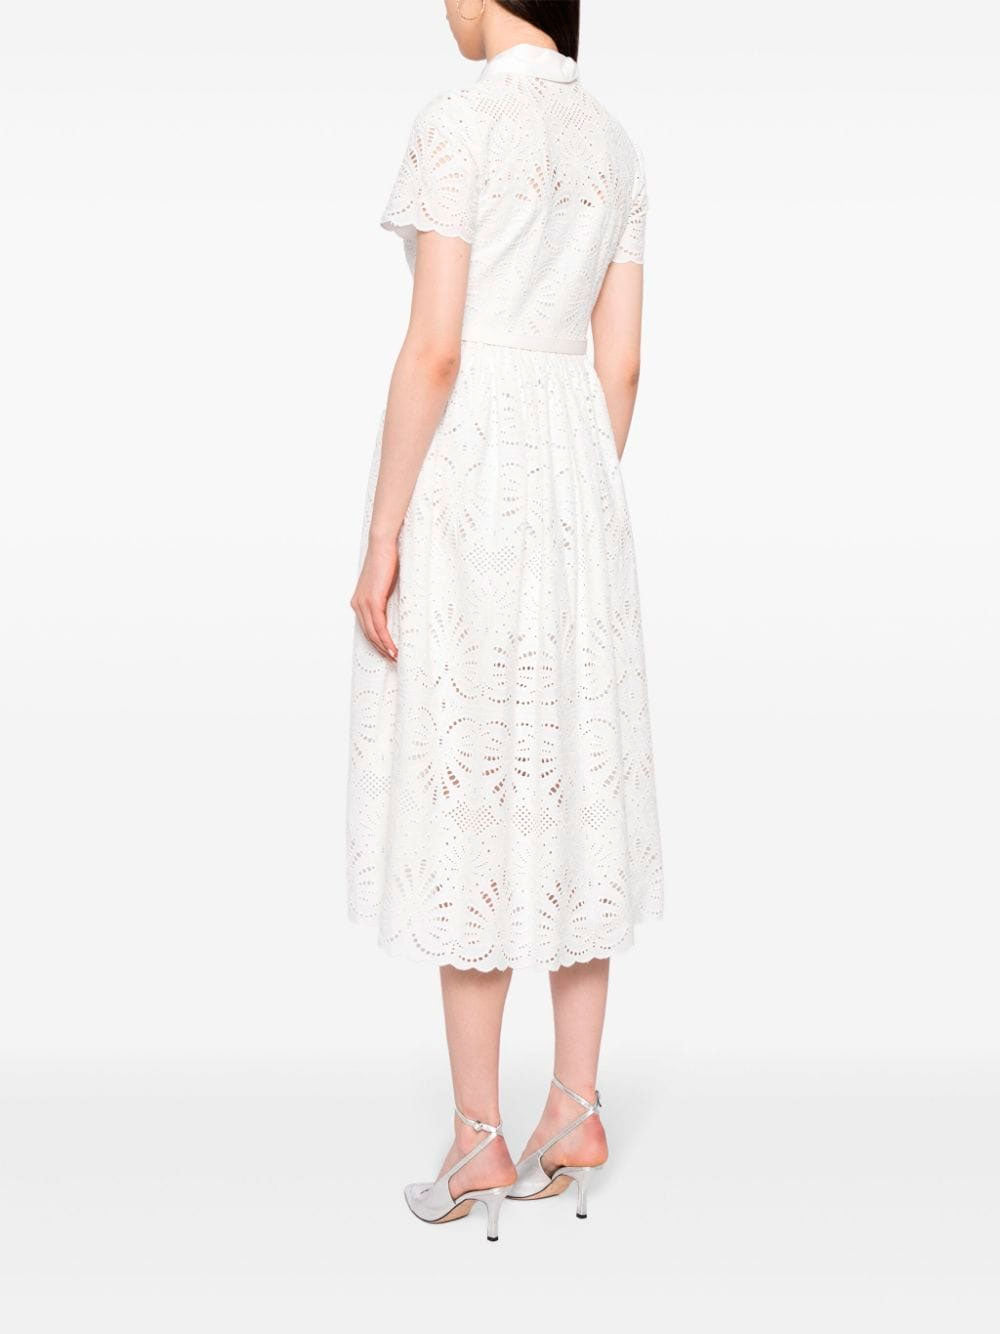 Broderie-anglaise dress